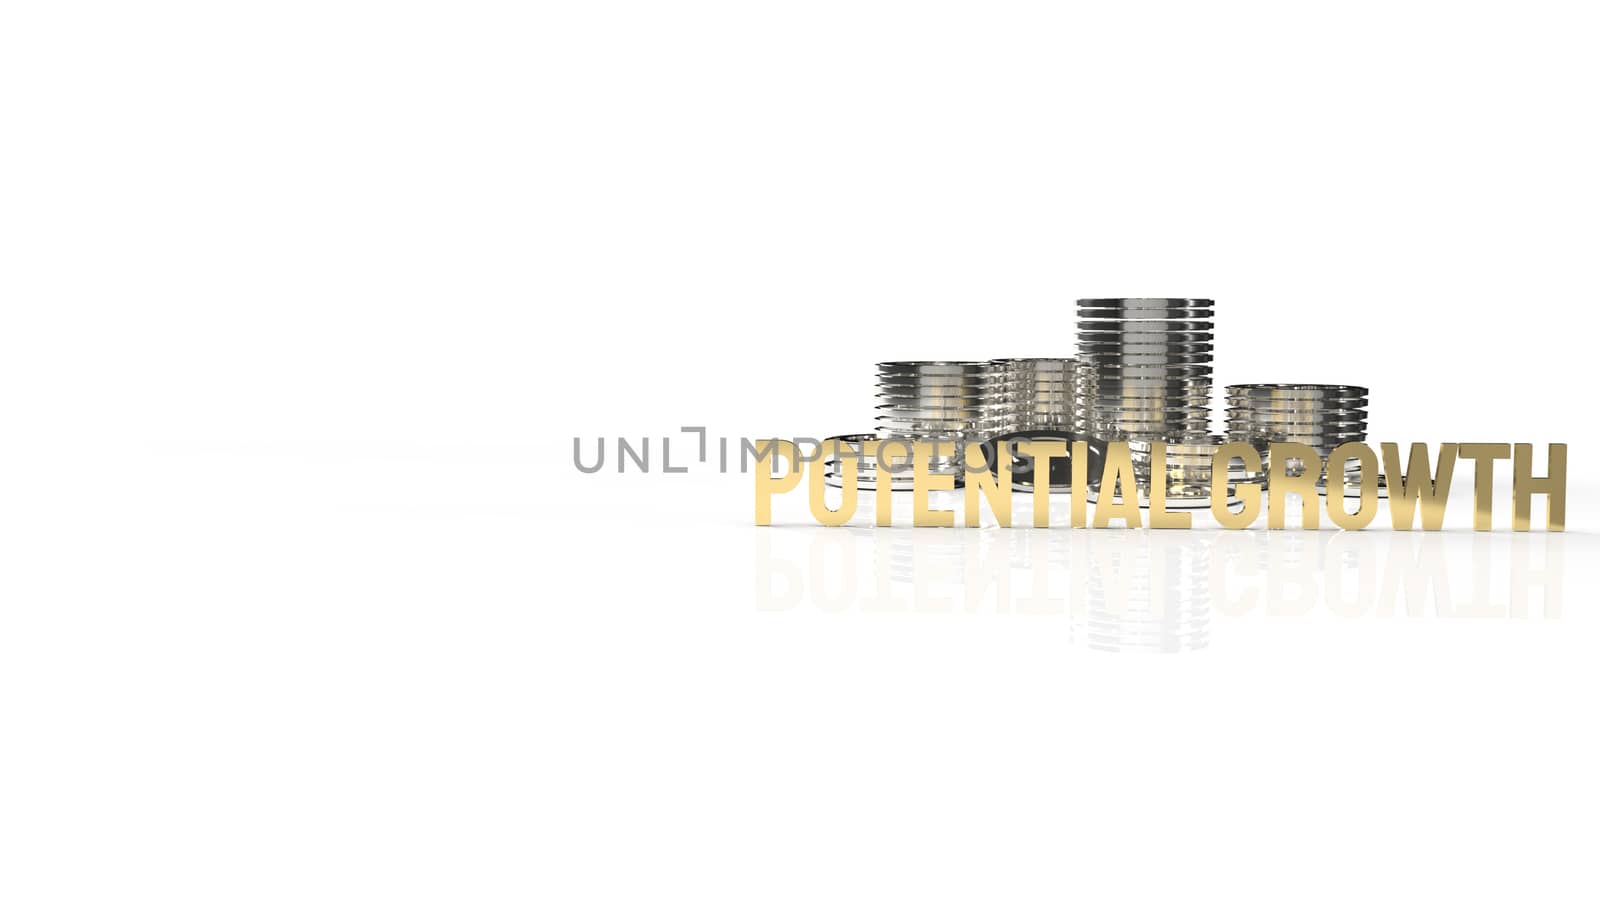 The gold text  potential growth on white background for business content 3d rendering.

